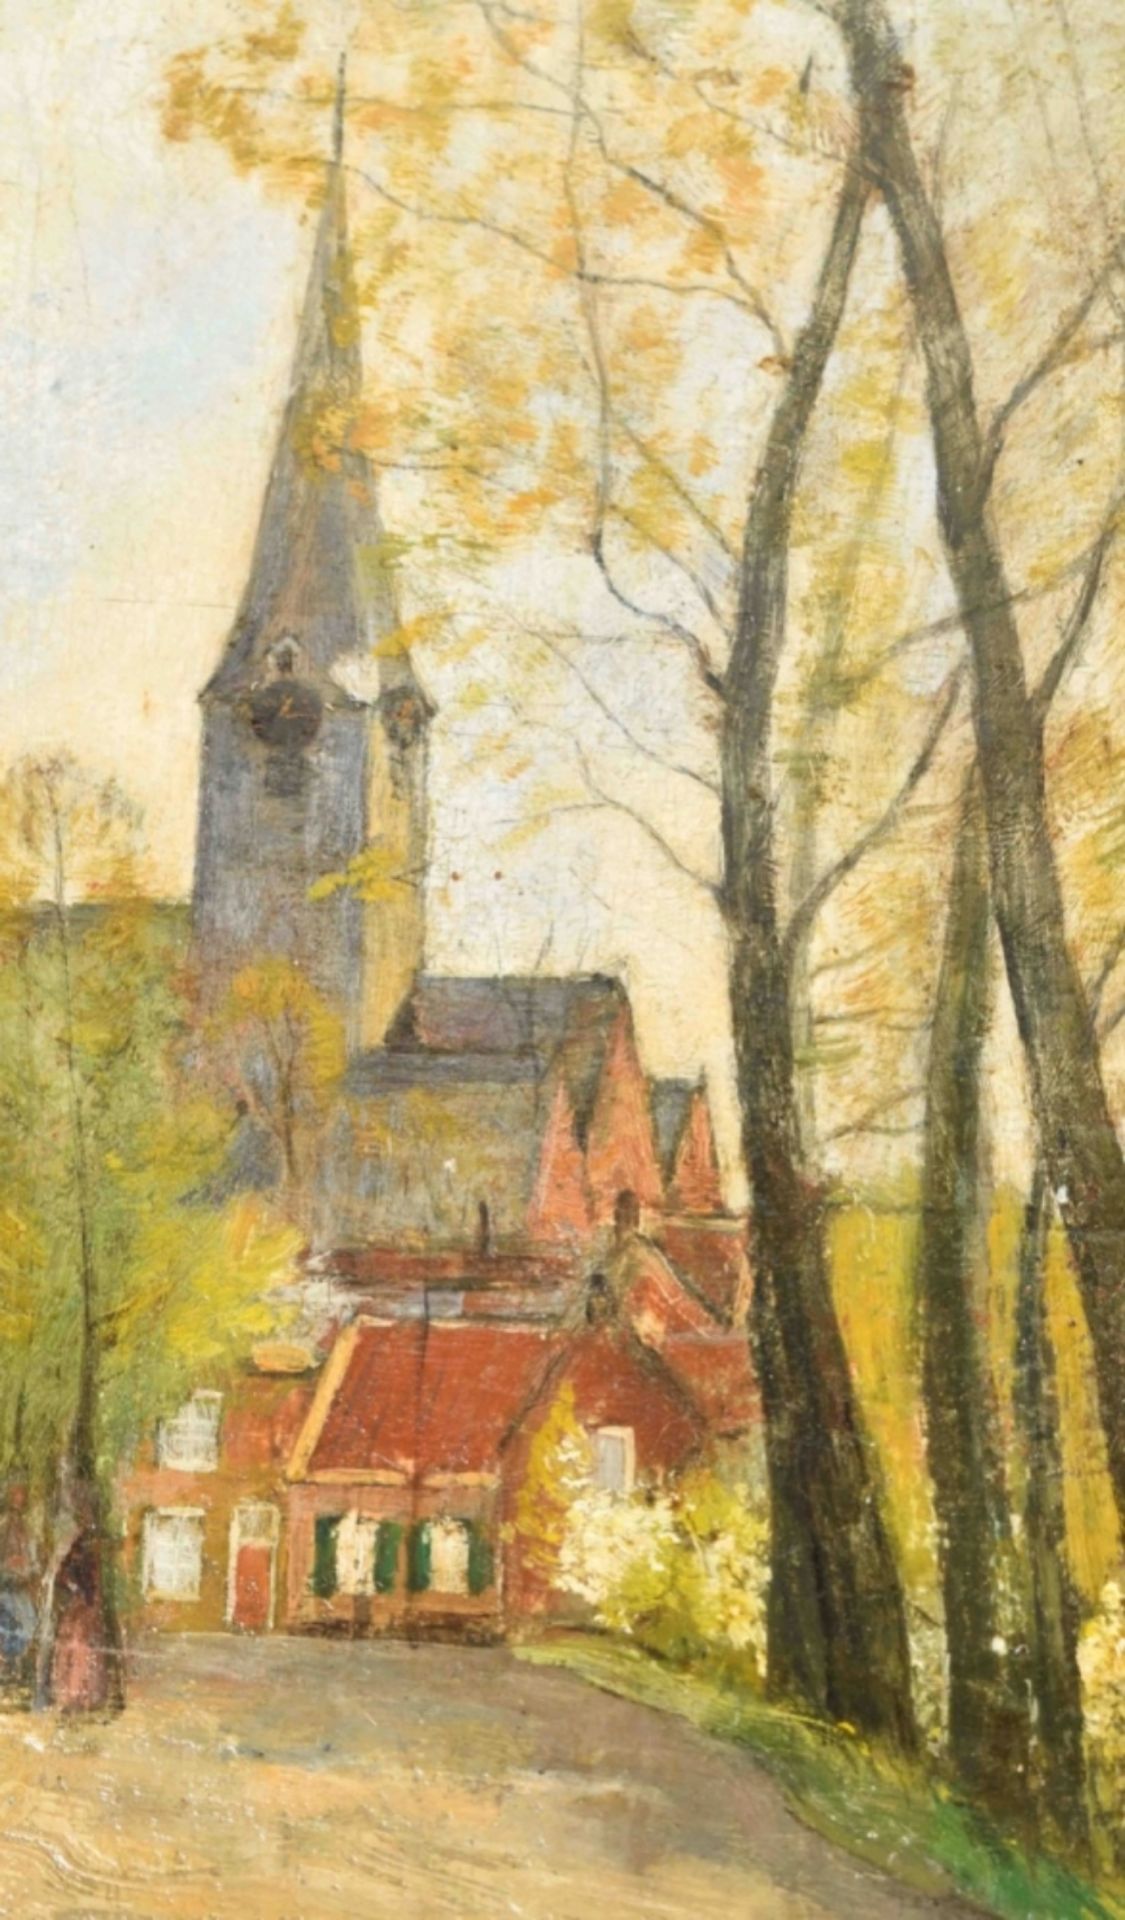 (Attributed to) Matthijs Maris (1839-1917). "View of a church on a hill" - Image 4 of 5